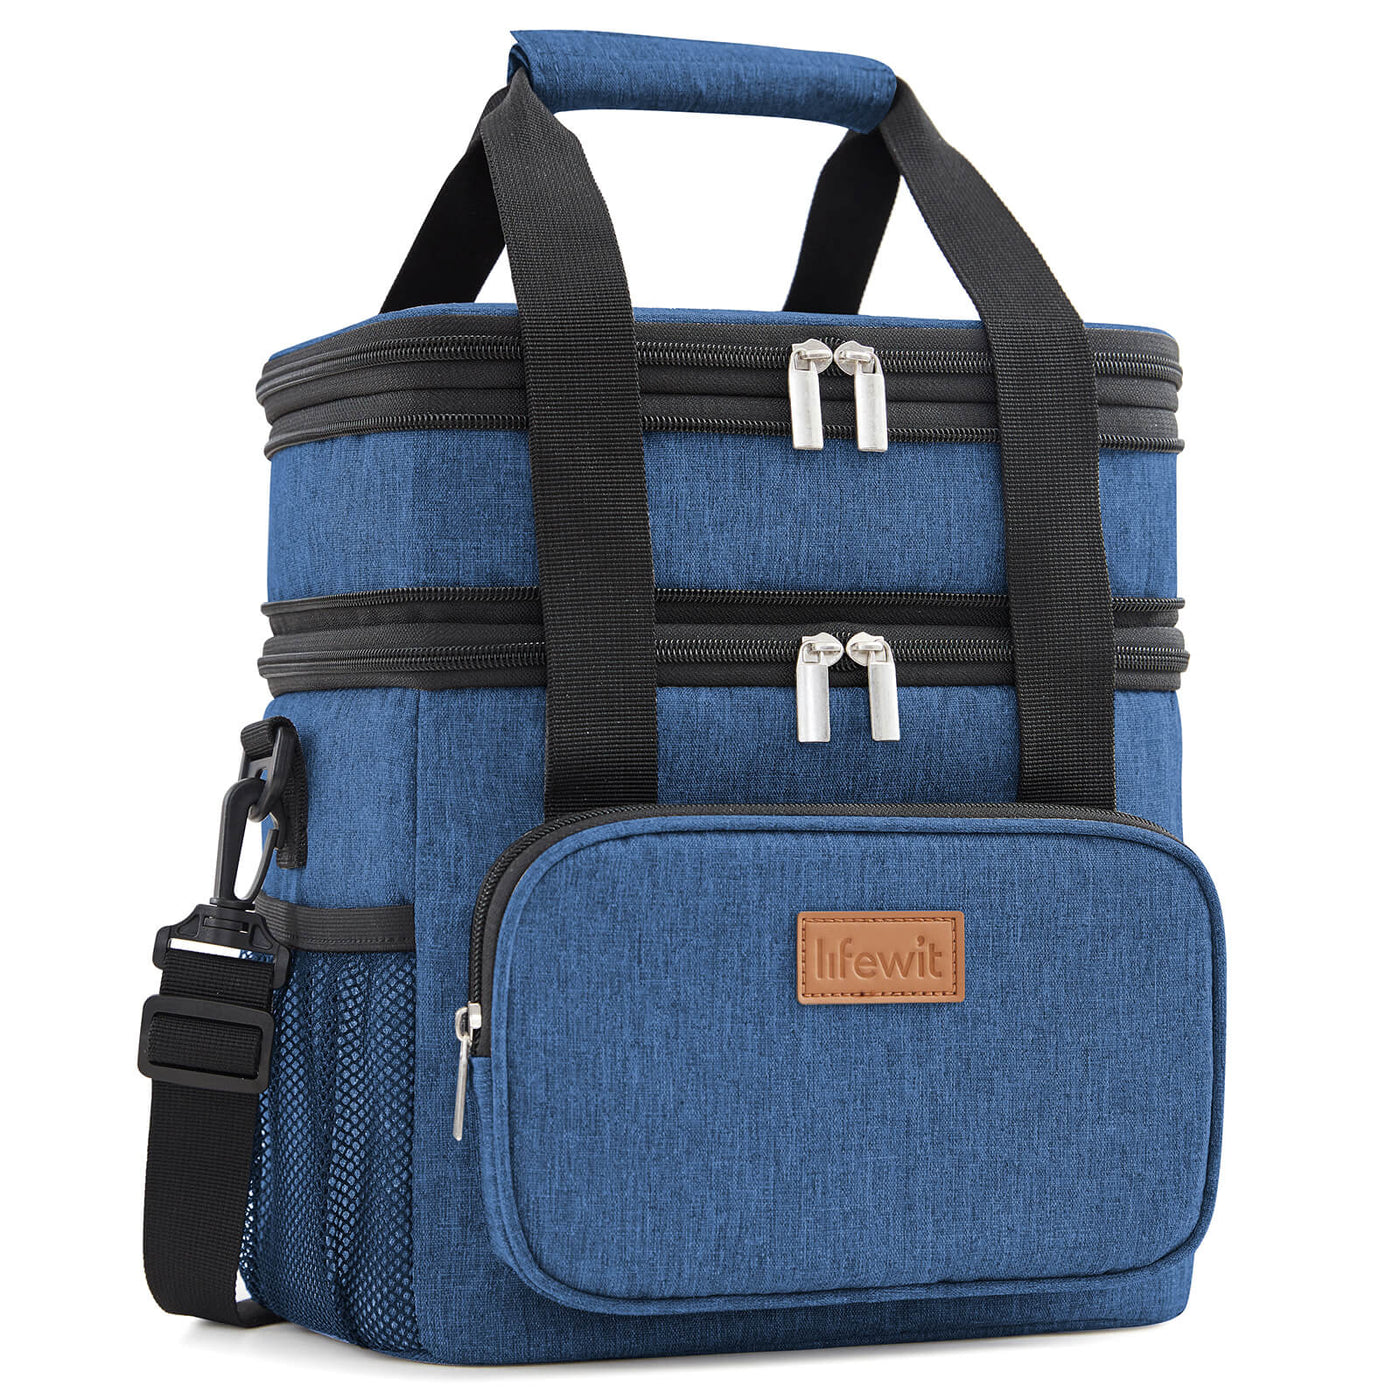 Double Deck Insulated Lunch Bag - Lifewit – Lifewitstore